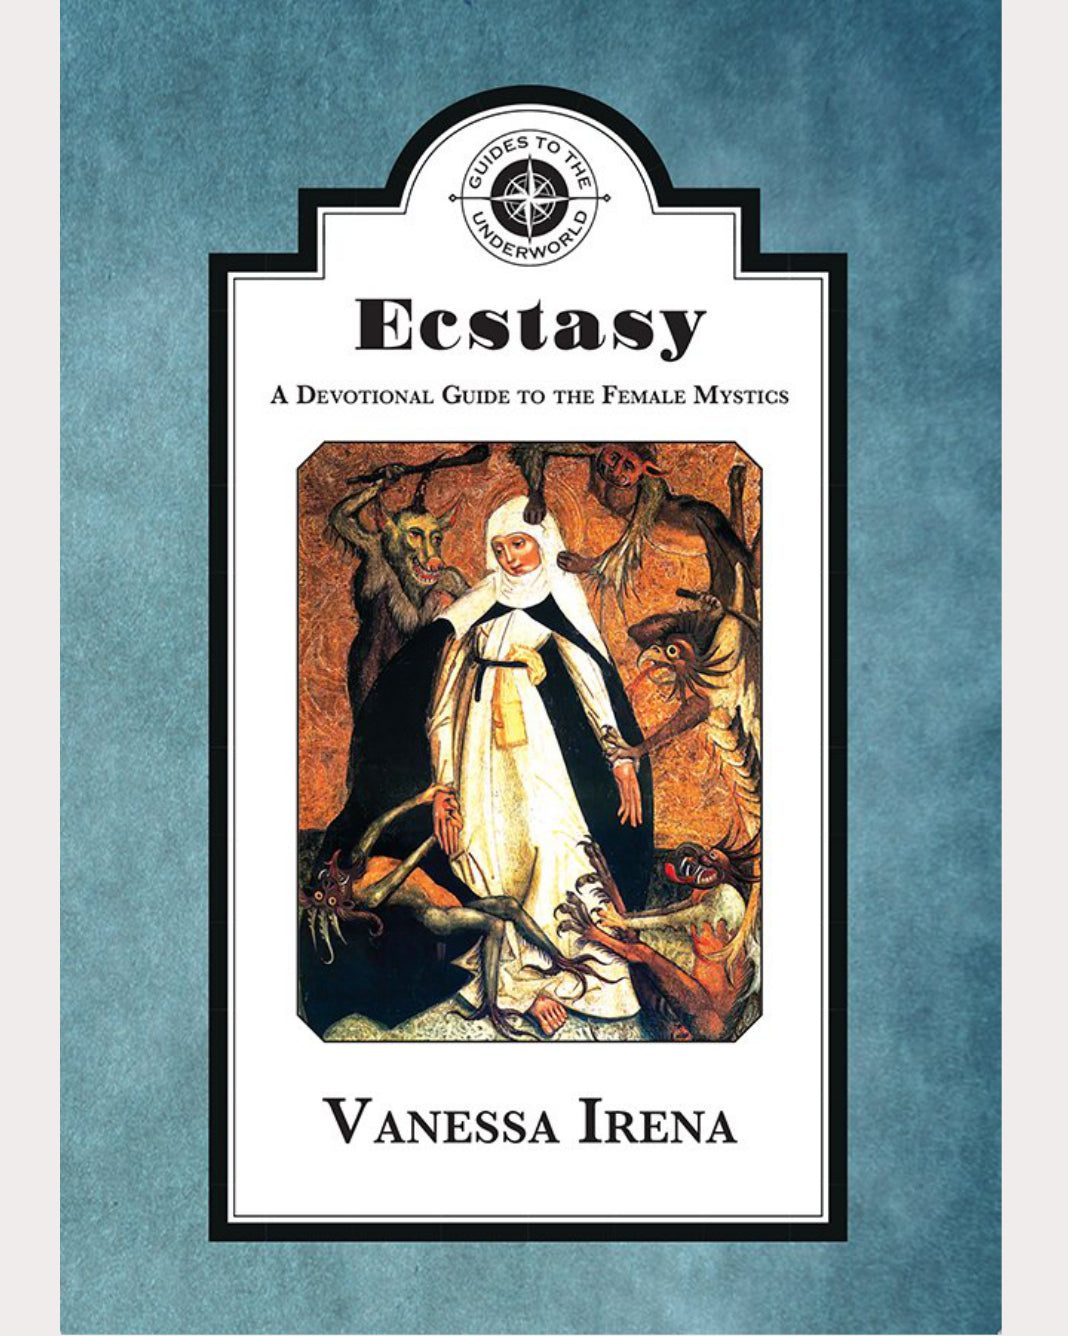 Ecstasy: A Devotional Guide to the Female Mystics